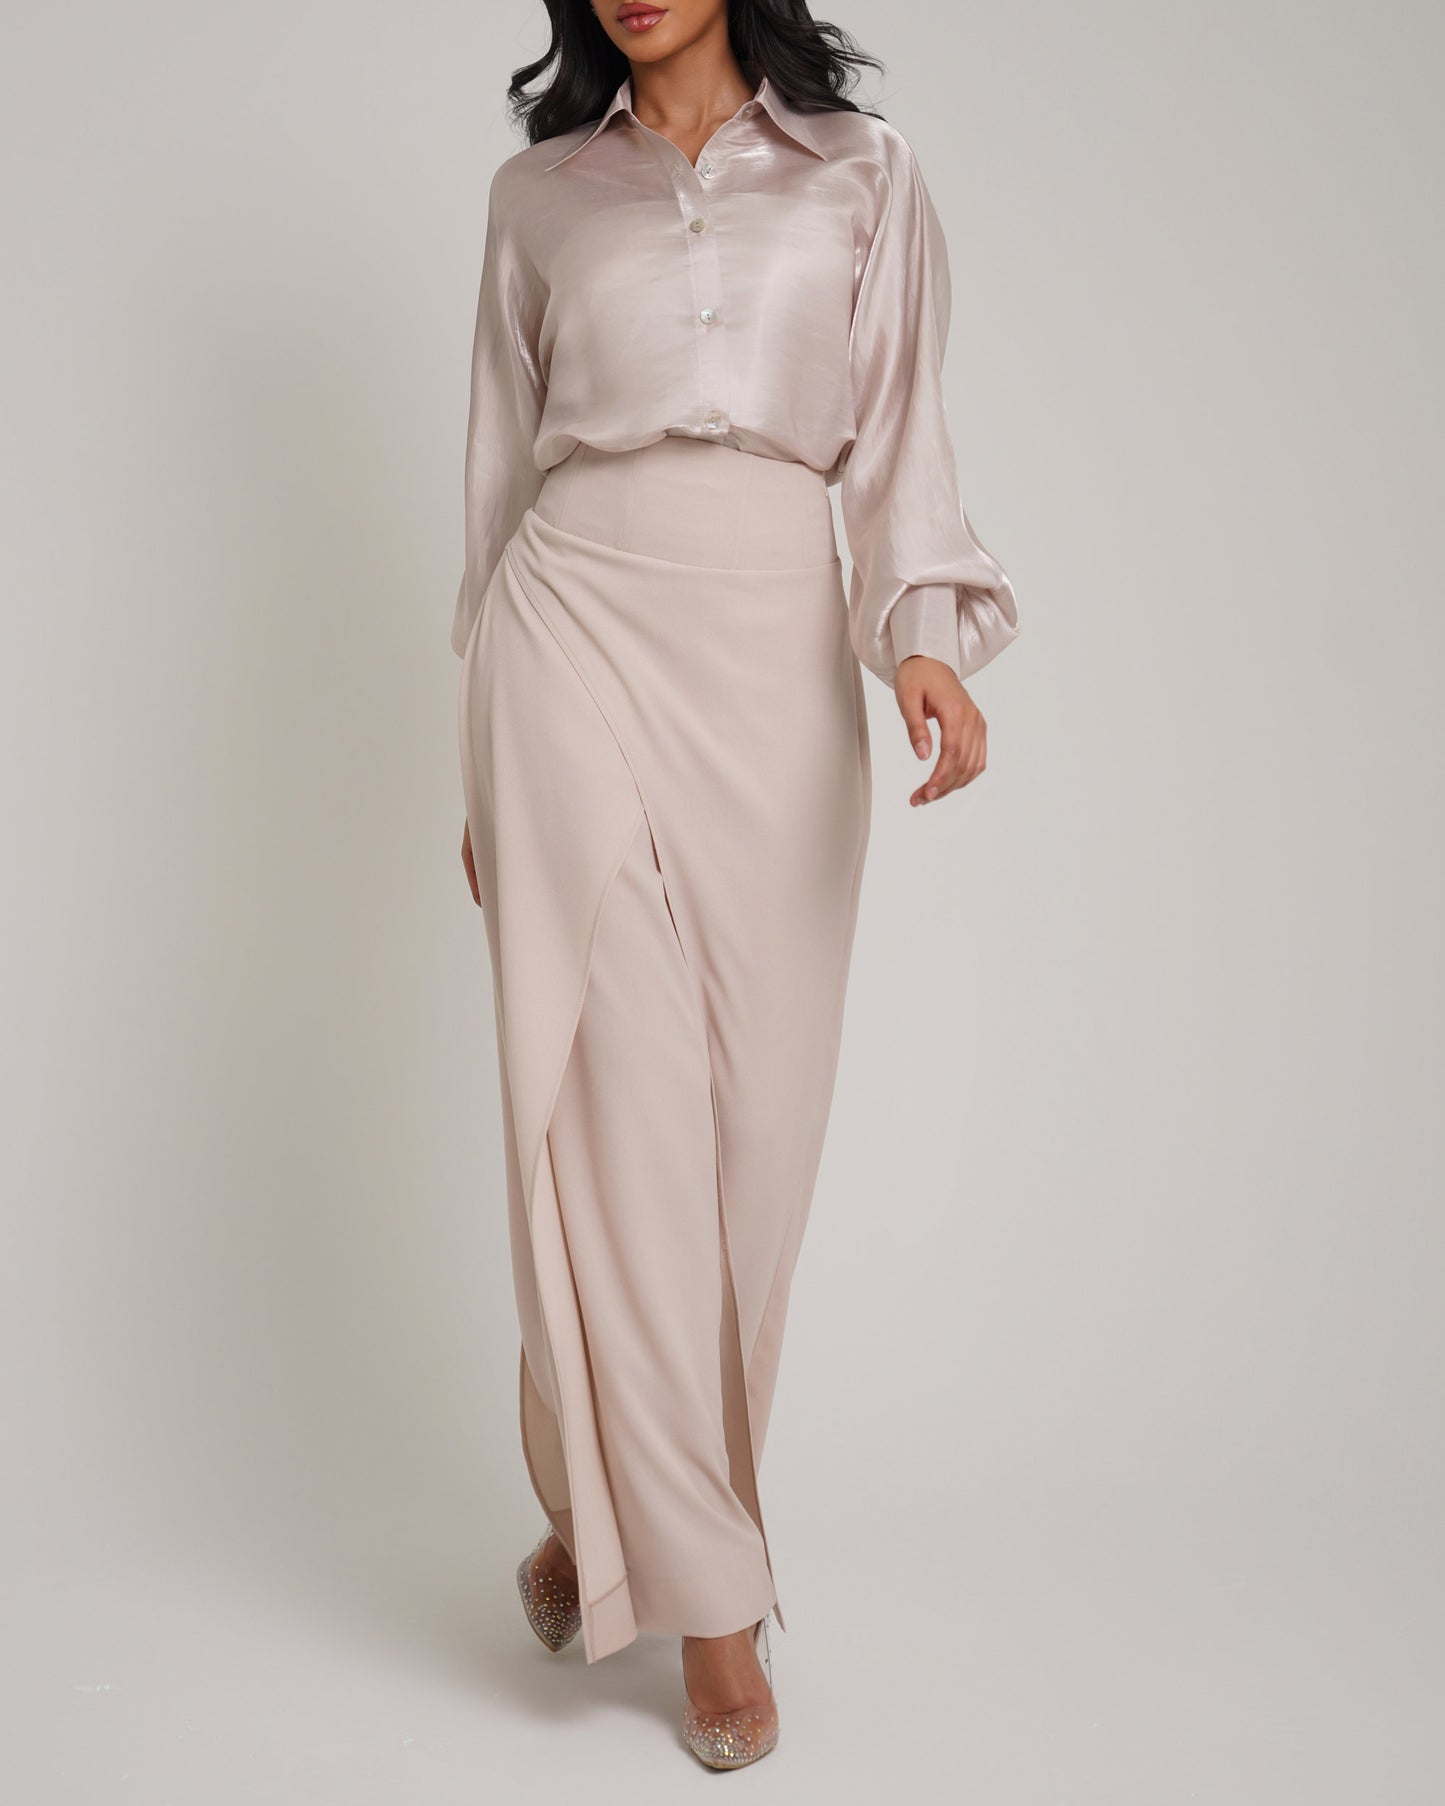 Overlapped corset waist trousers paired with organza shirt